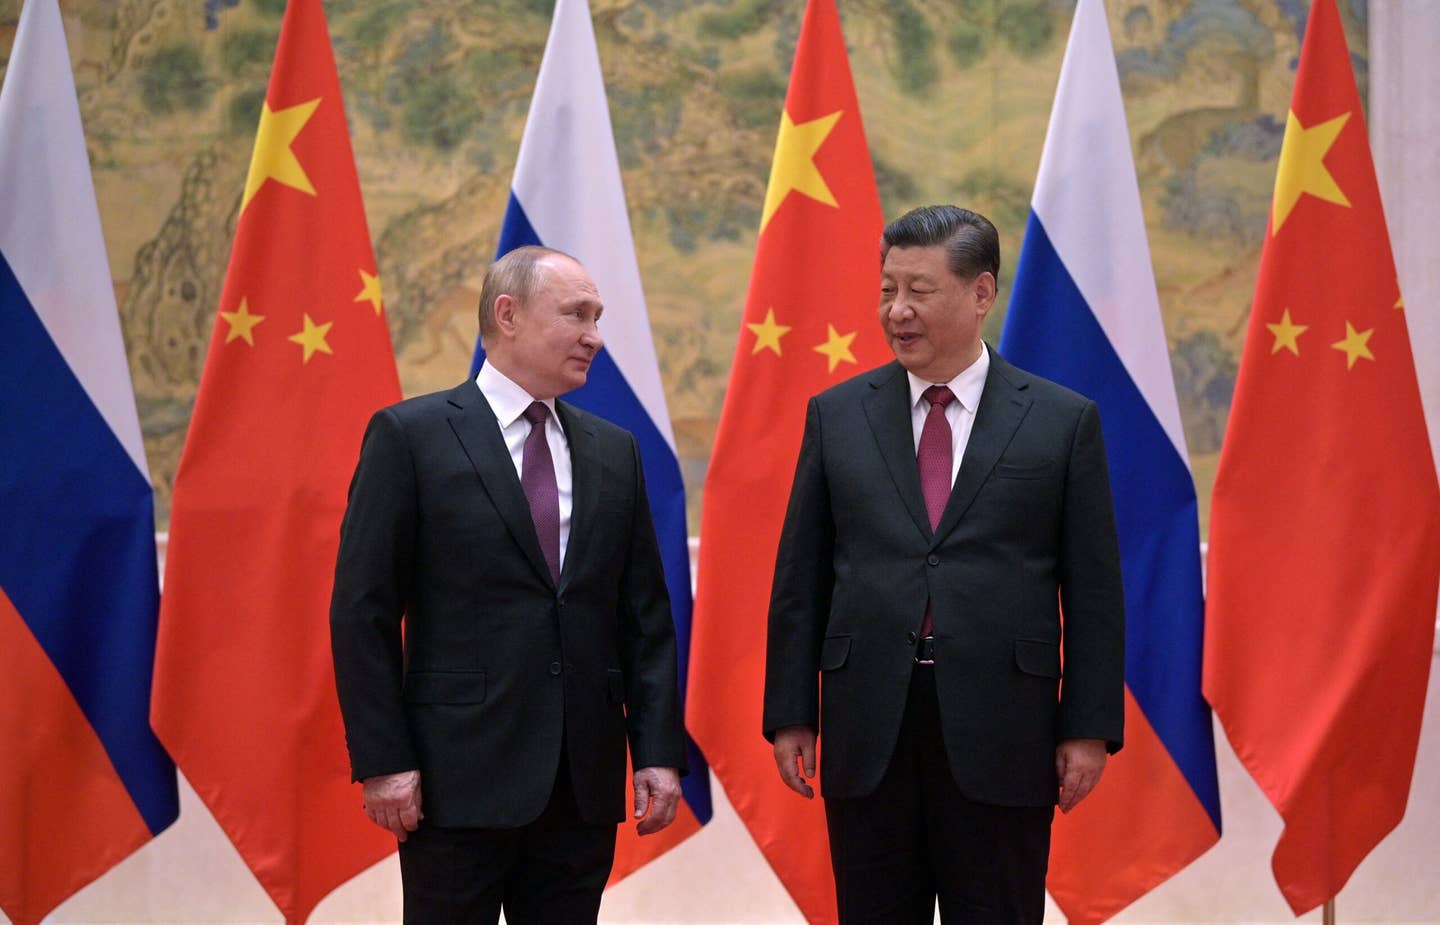 Russian President Vladimir Putin (left) and Chinese President Xi Jinping pose during a meeting in Beijing, in February 2022. <em>Photo by ALEXEI DRUZHININ/Sputnik/AFP via Getty Images</em>